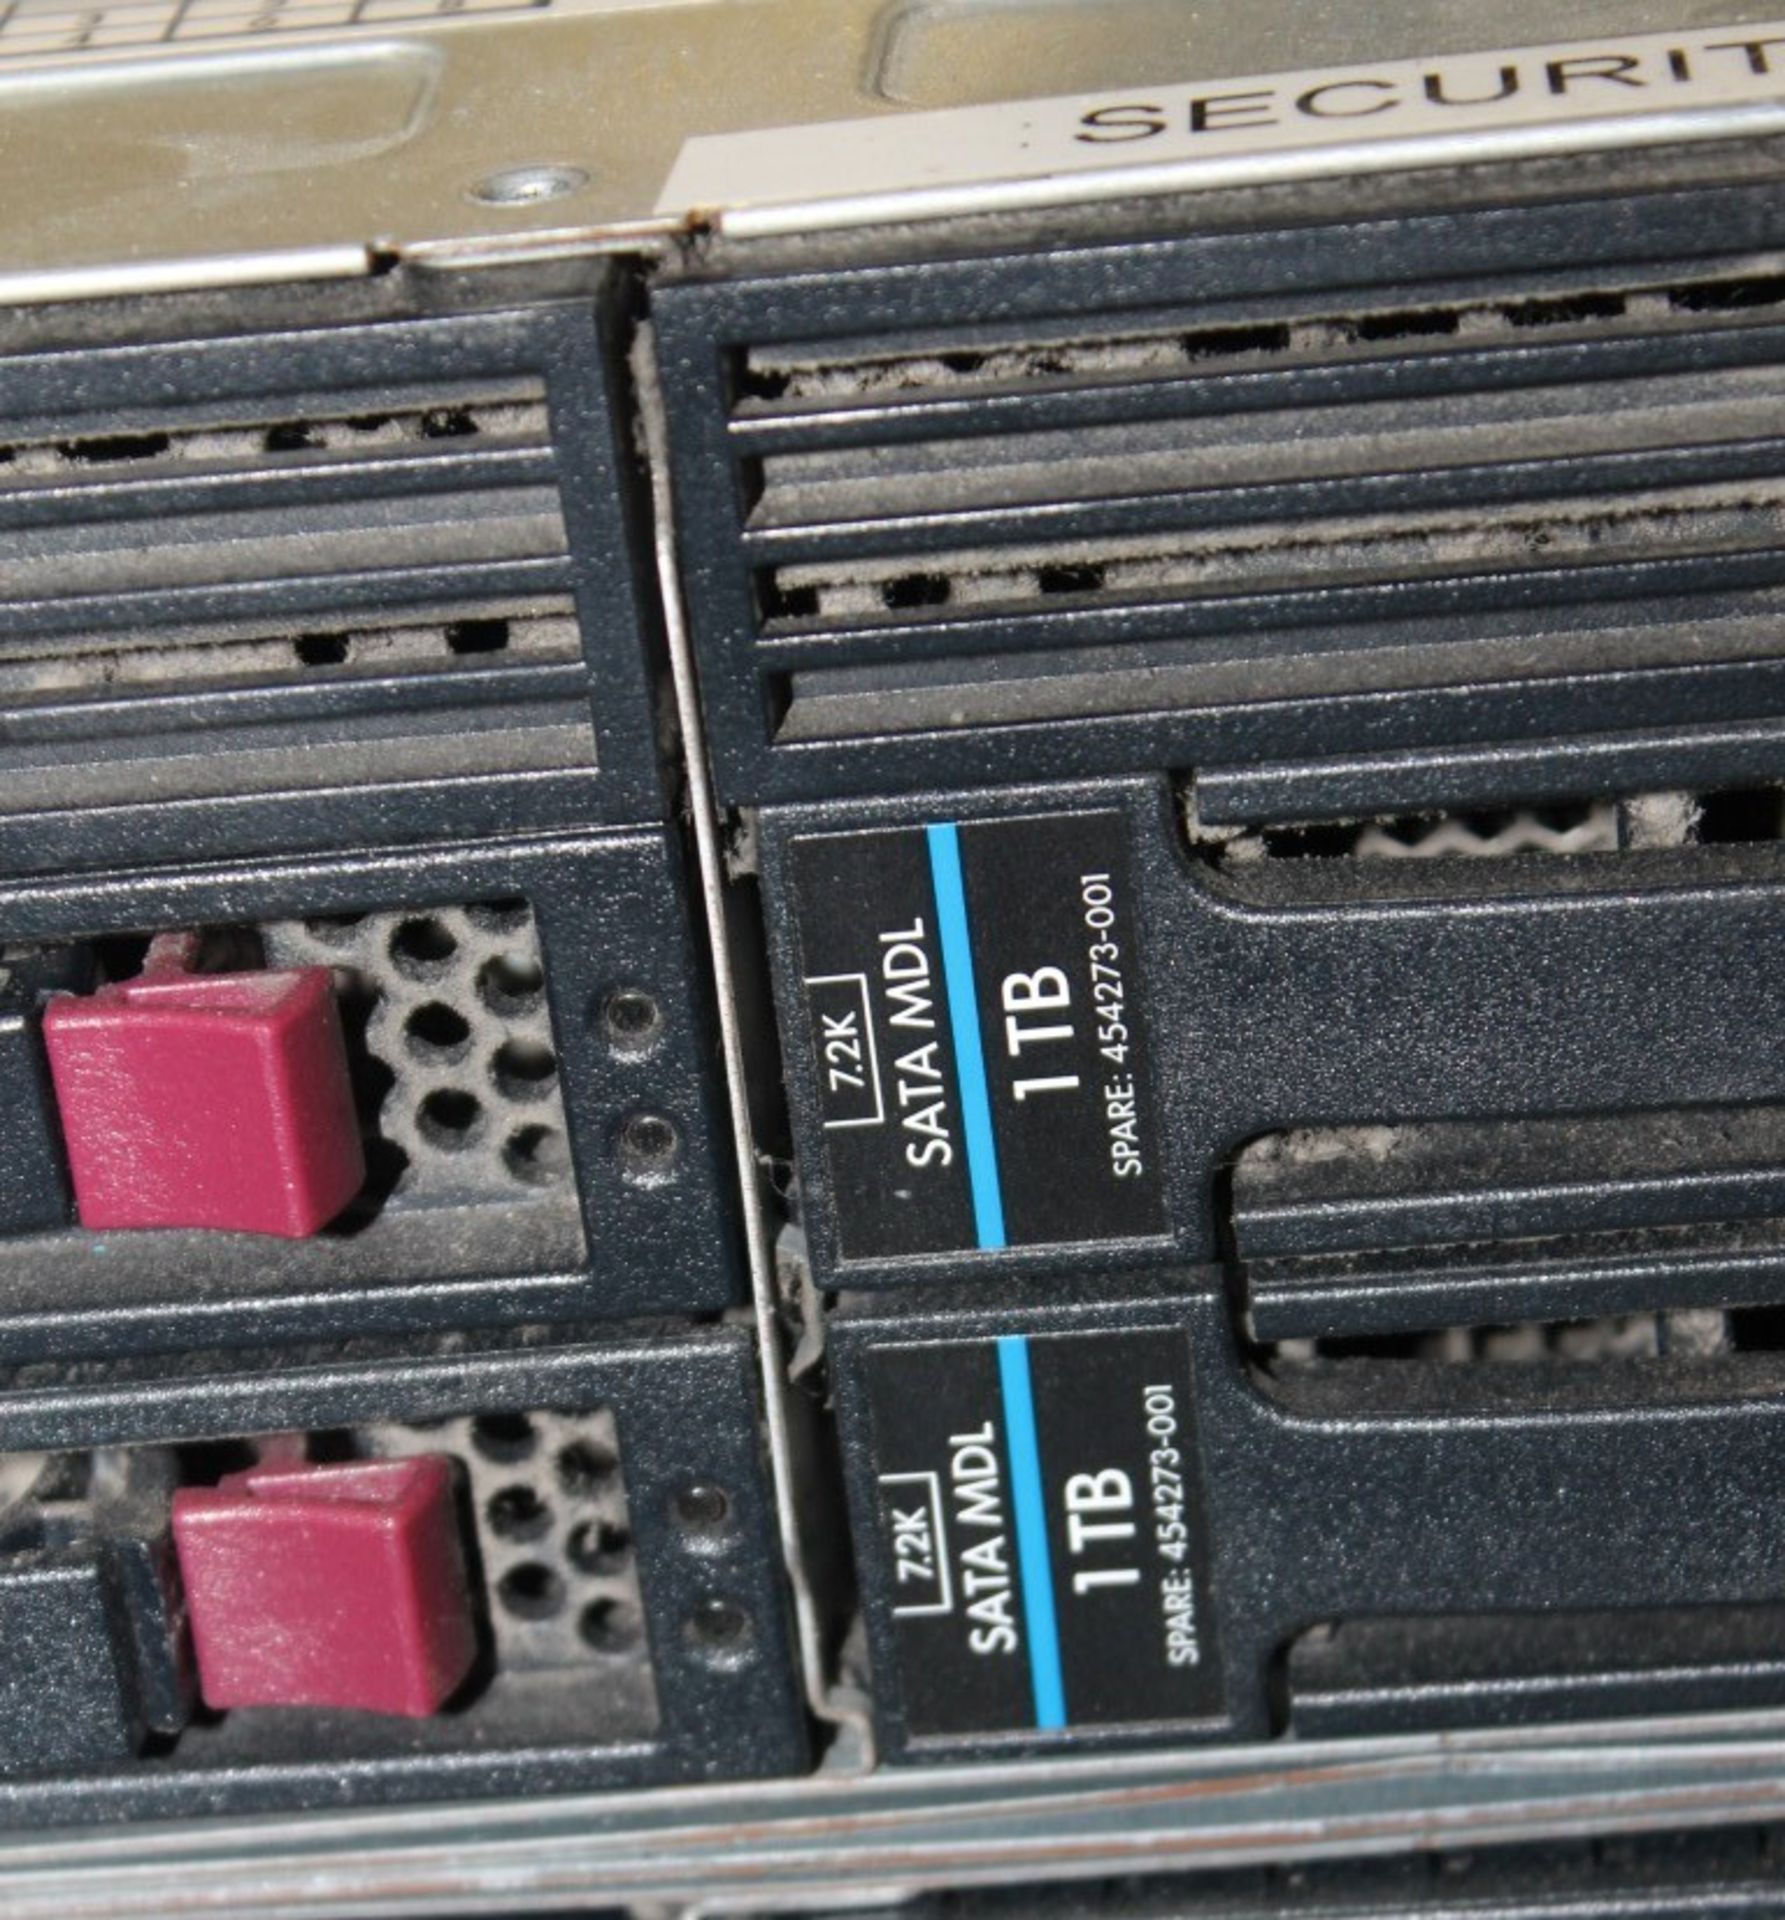 HP PROLIANT DL180 G6 SERVER WITH 8 PCS OF 1TB HARD DRIVE - Image 3 of 4